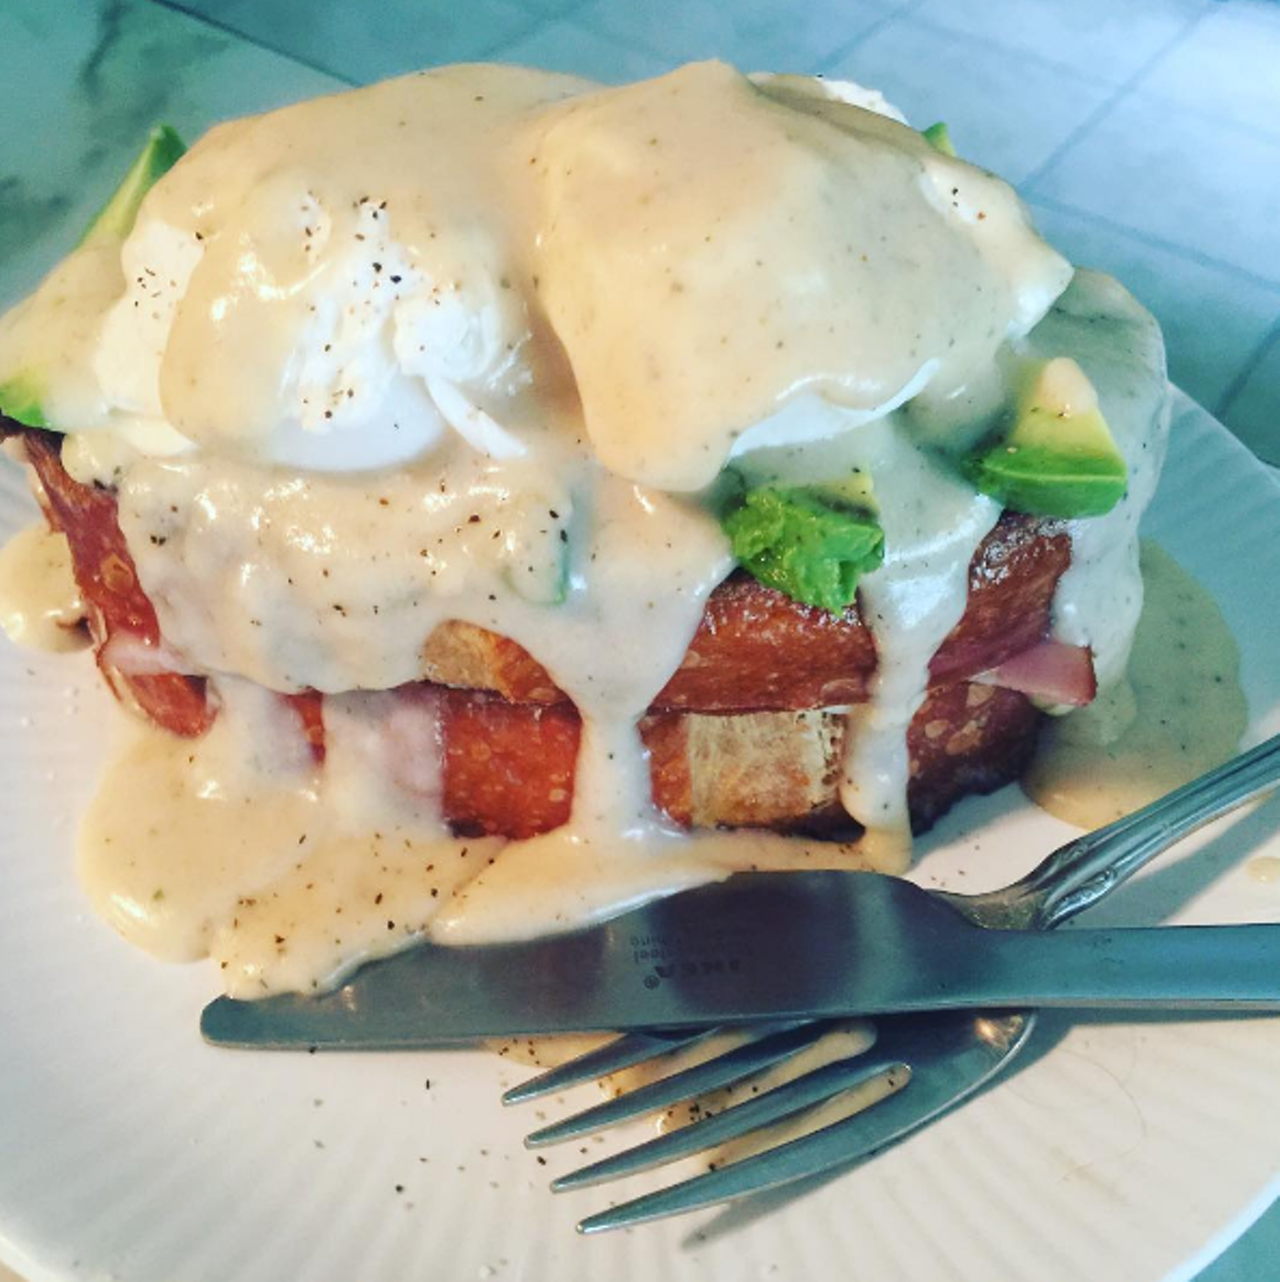  Hippie Mommas
They call it &#147;comfort food with attitude,&#148; we call it delicious. The mommas have been making burgers, tacos, waffles and more since 2013. 
Photo via Instagram,  Hippie Mommas